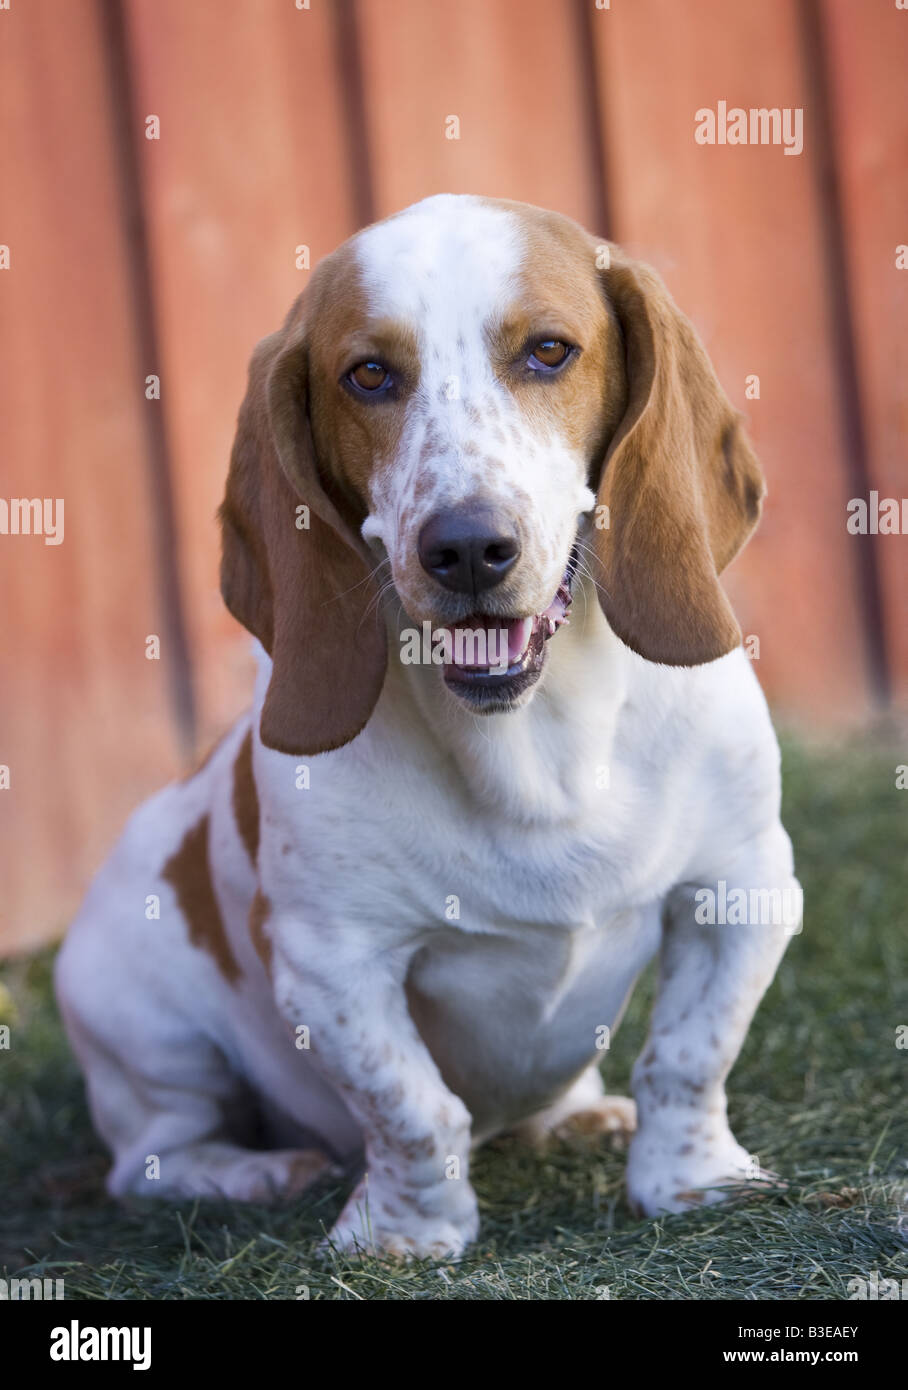 Cute brown and white spotted adult Basset Hound outdoors in grass Stock Photo